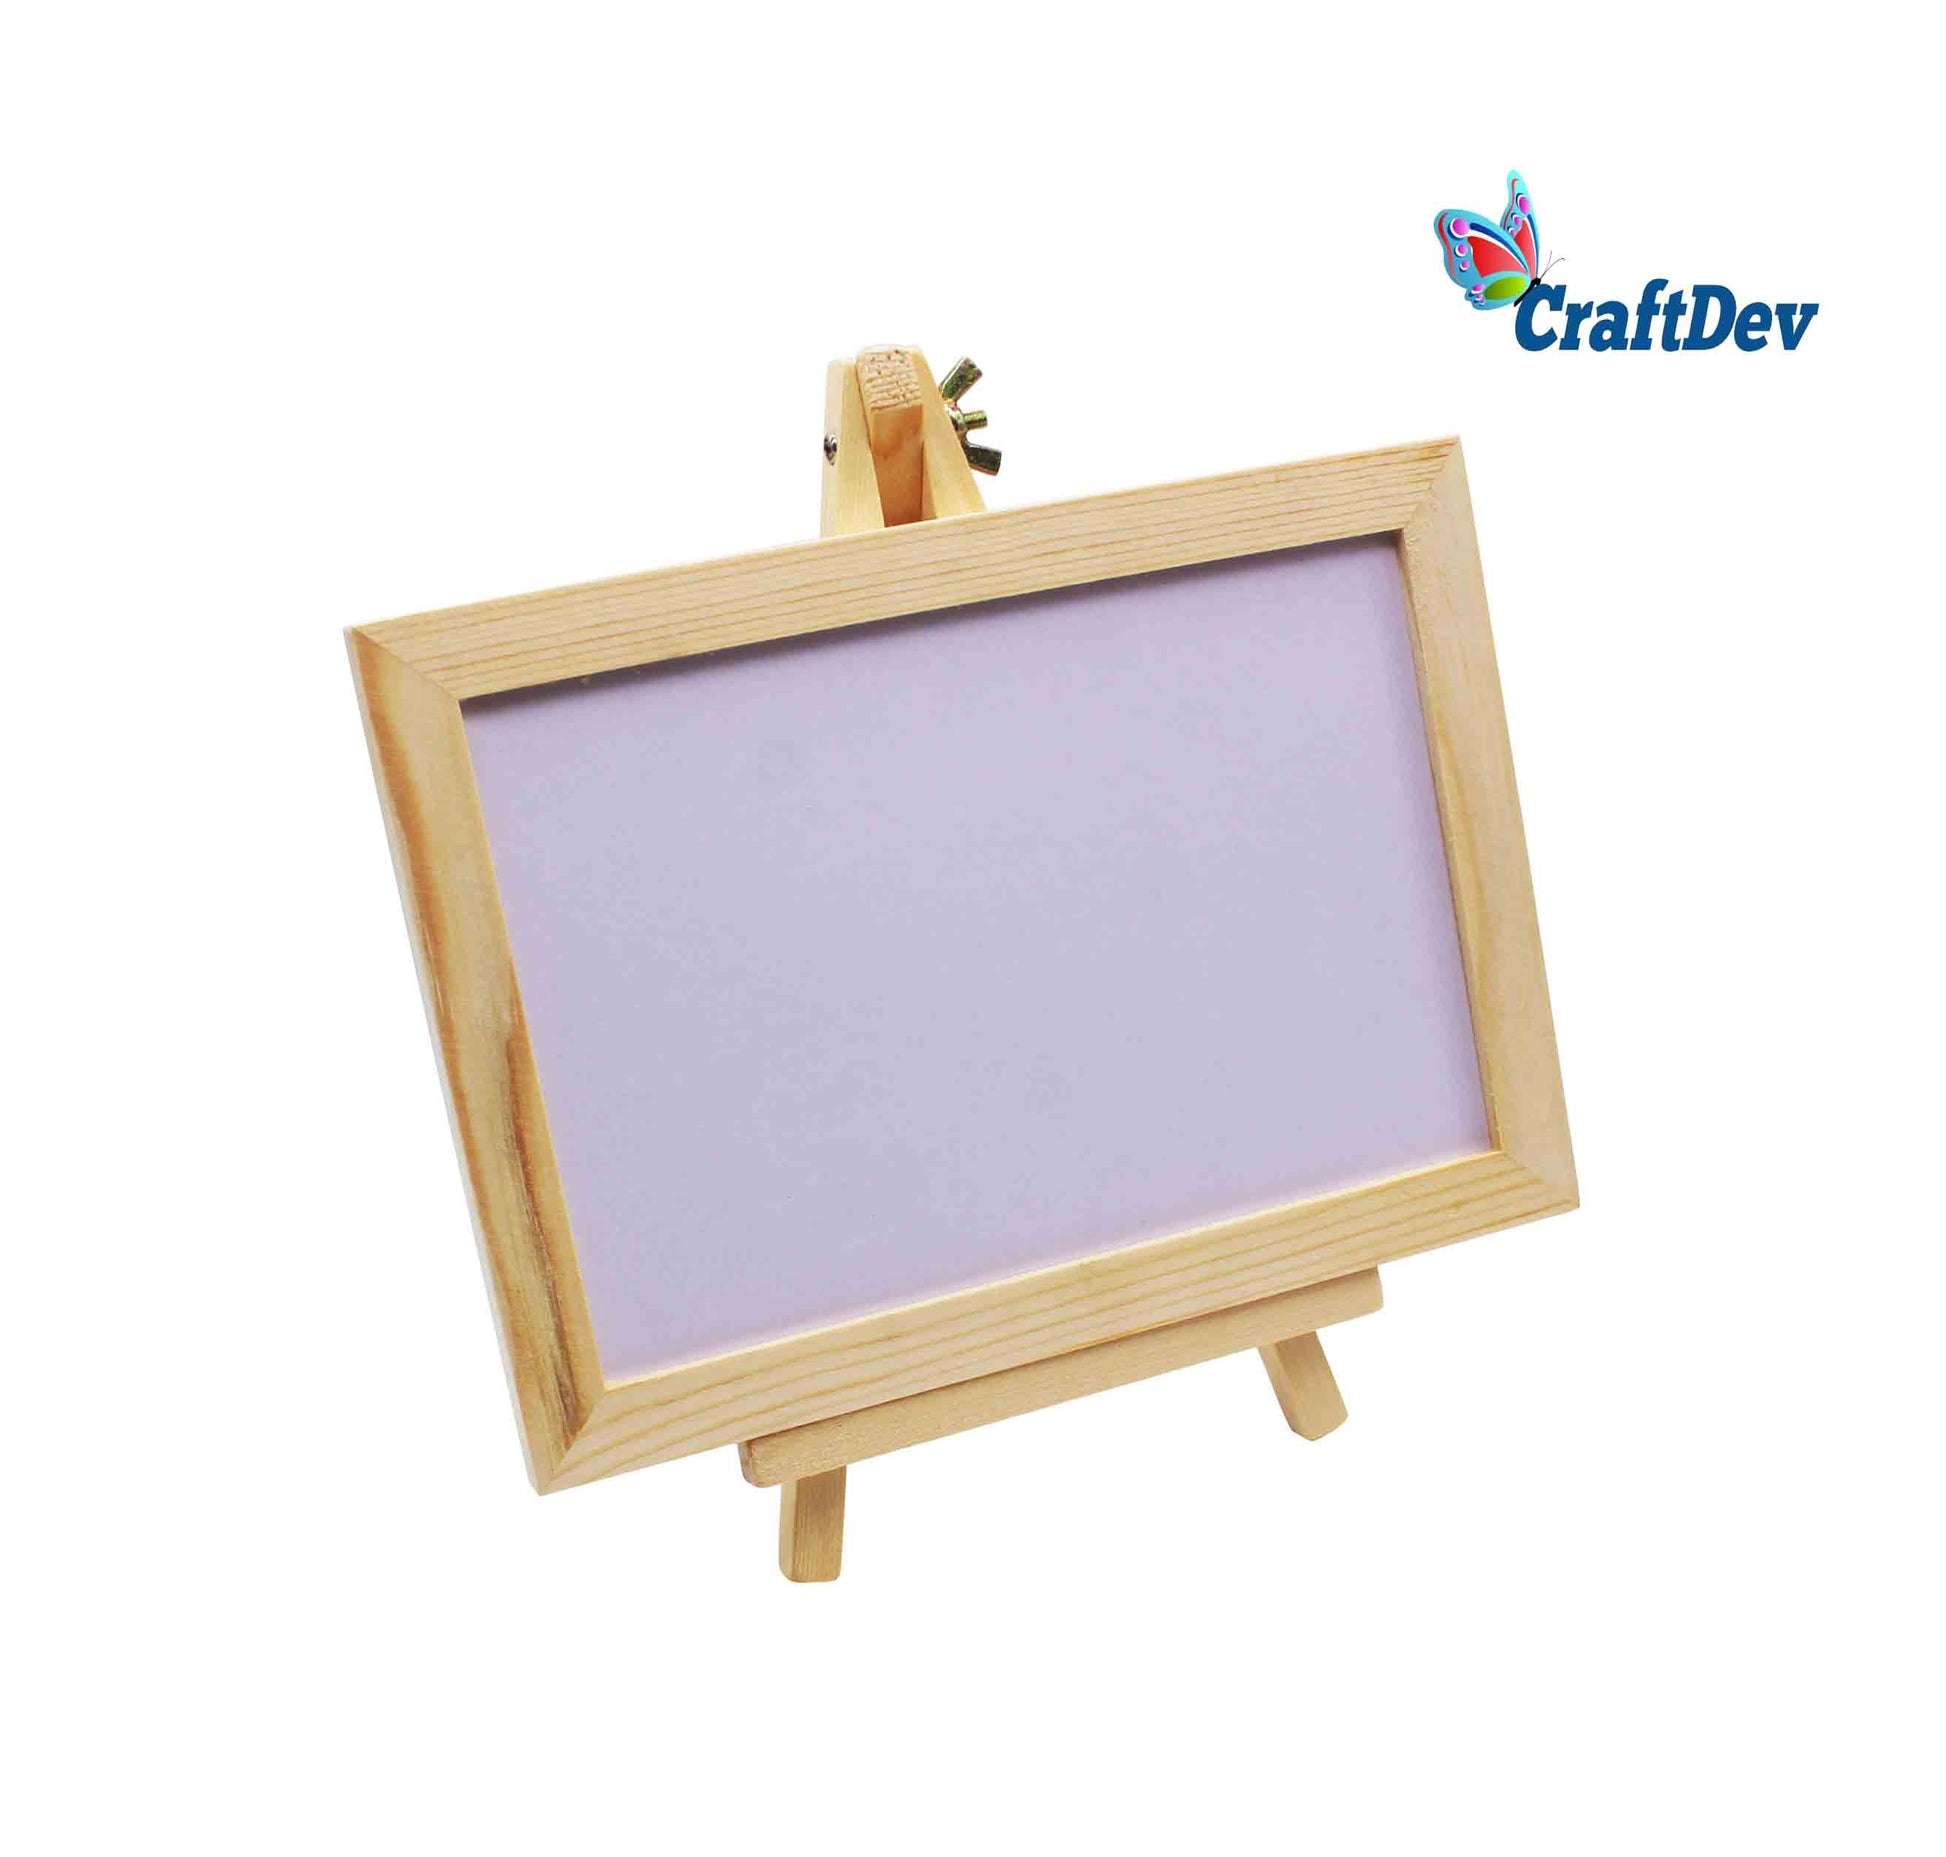 MG Traders Easel Wooden White Board Easel 7" (Wwb7)  (Pack of 2)